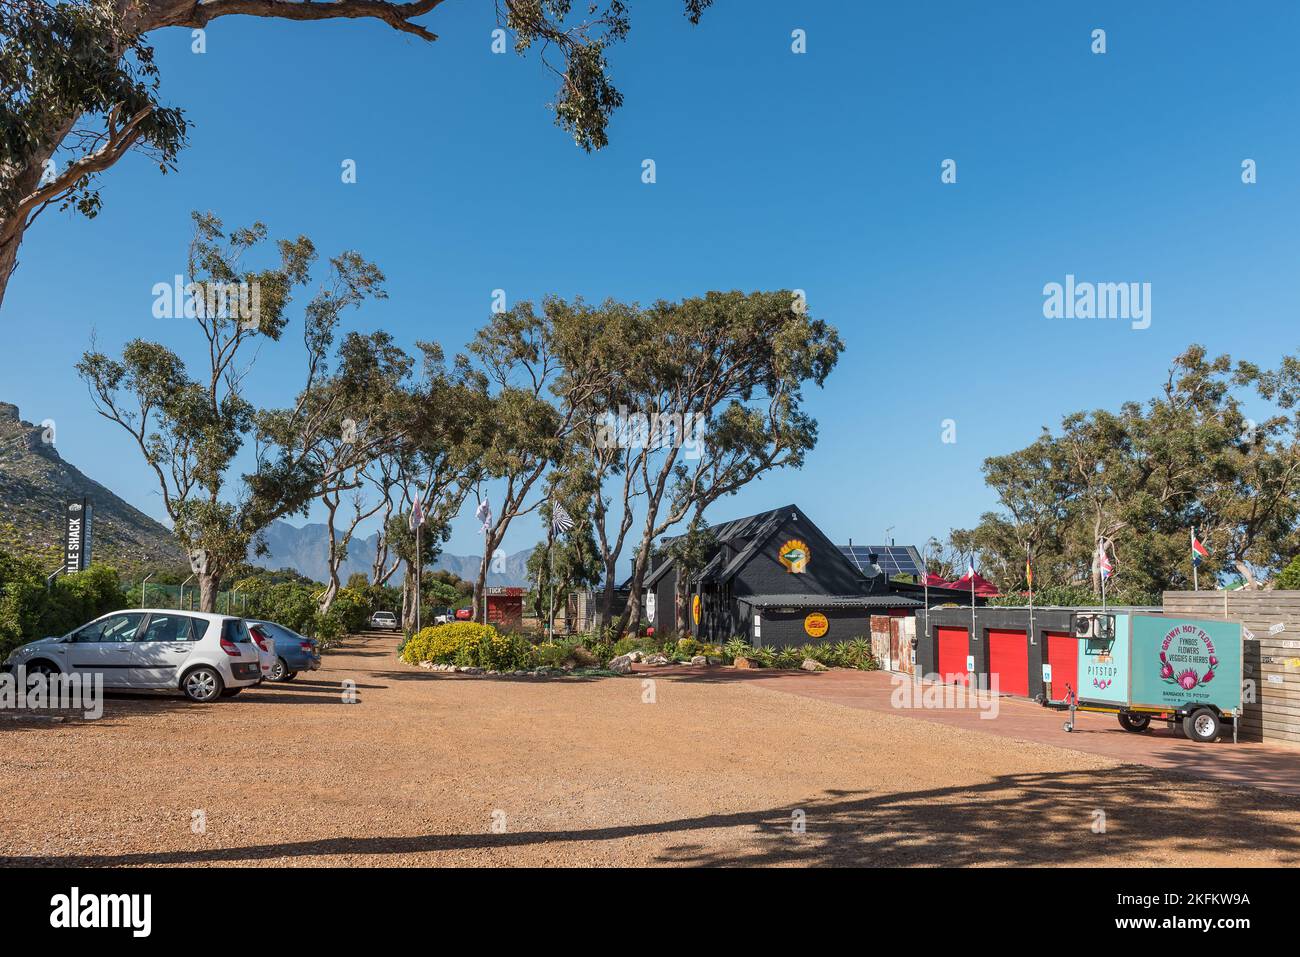 Gordons Bay, South Africa - Sep 20, 2022: The Grille Shack on Clarence Drive near Gordons Bay in the Western Cape Province. Vehicles are visible Stock Photo